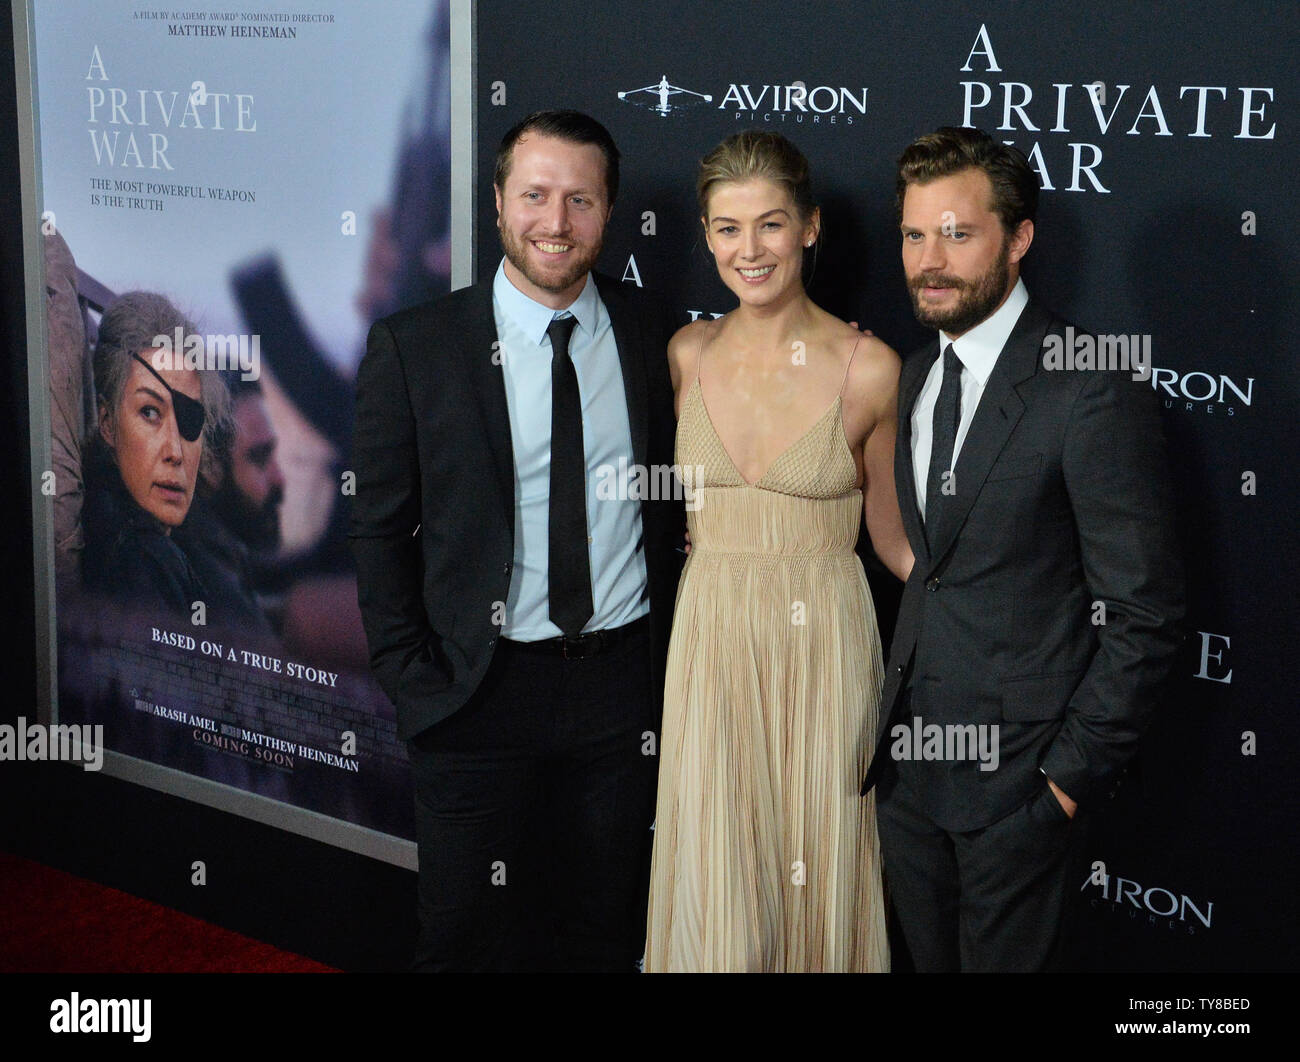 Director Matthew Heineman and cast members Rosamund Pike and Jamie Dornan (L-R) attend the premiere of the motion picture biographical war drama 'A Private War' at the Academy of Motion Picture Arts & Sciences in Beverly Hills, California on October 24, 2018.  The film tells the story of one of the most celebrated war correspondents of our time, Marie Colvin, who is an utterly fearless and rebellious spirit, driven to the frontline of conflicts across the globe to give voice to the voiceless. Photo by Jim Ruymen/UPI Stock Photo